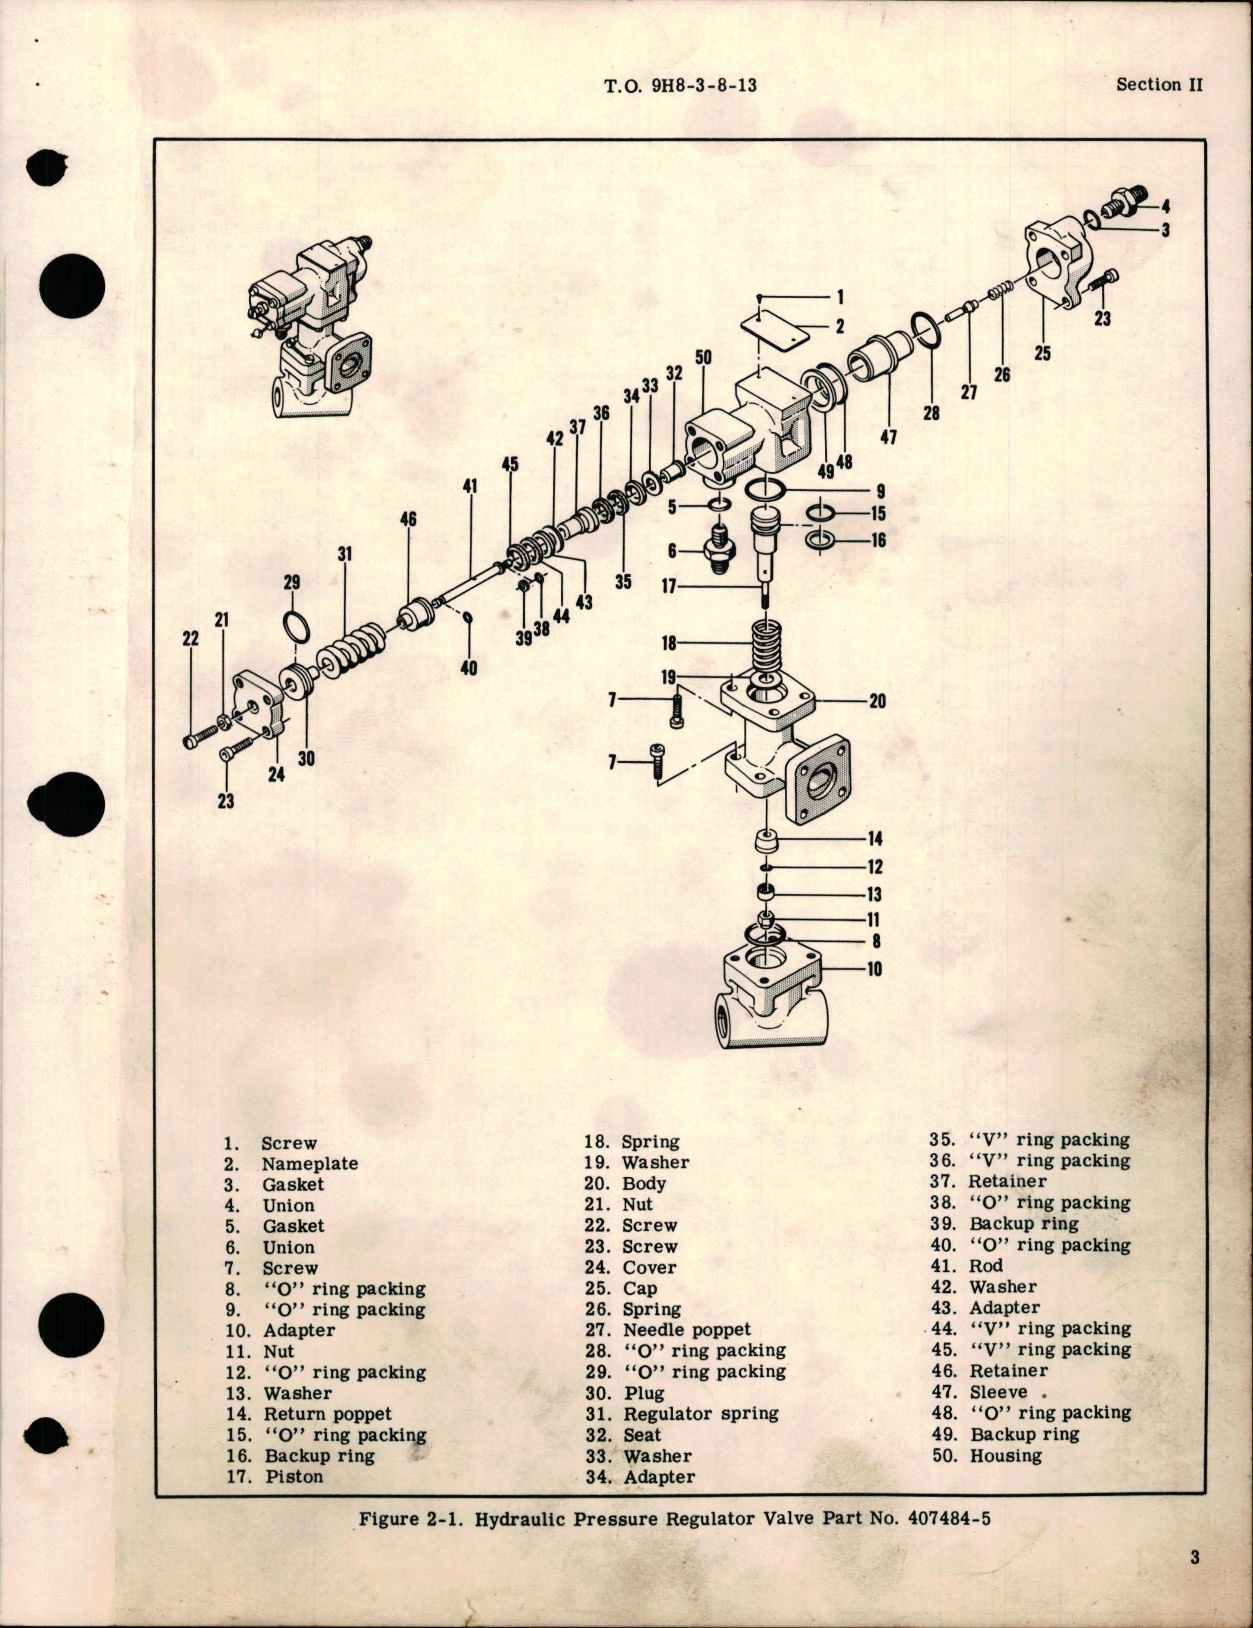 Sample page 5 from AirCorps Library document: Overhaul Instructions for Hydraulic Pressure Regulator Valves 